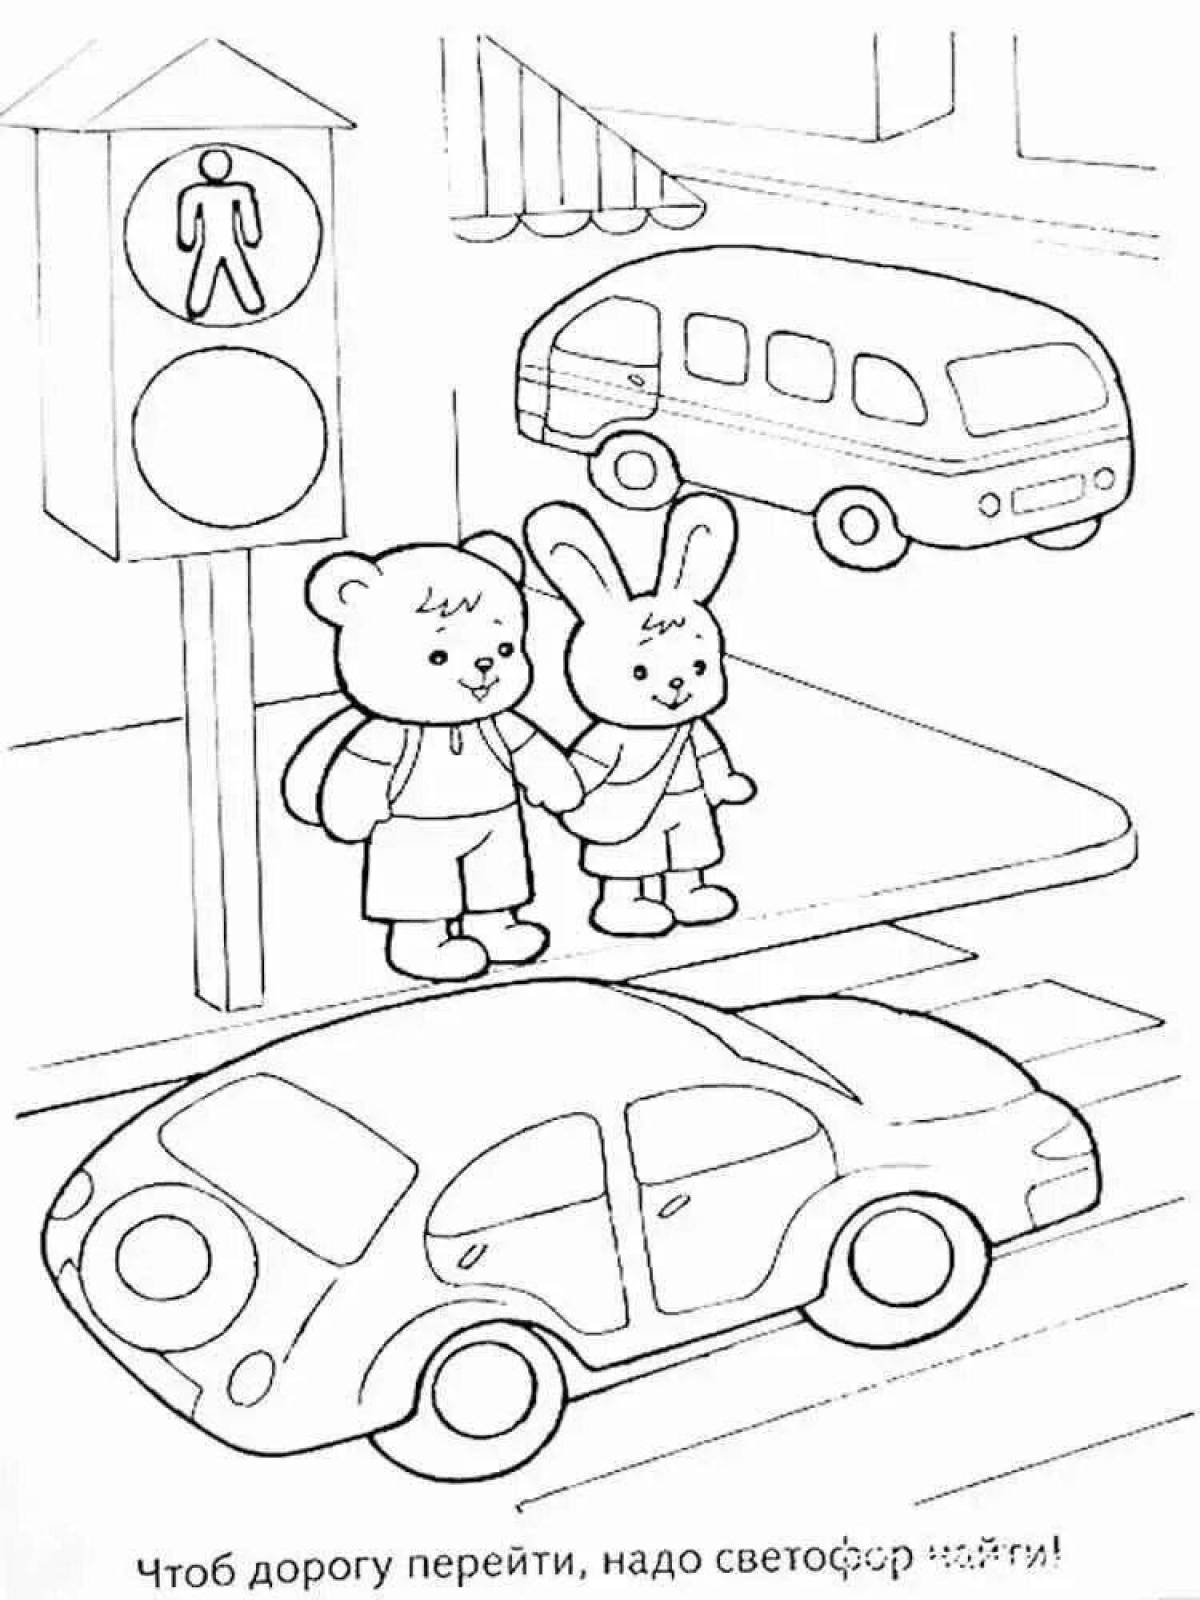 Attractive road safety coloring book